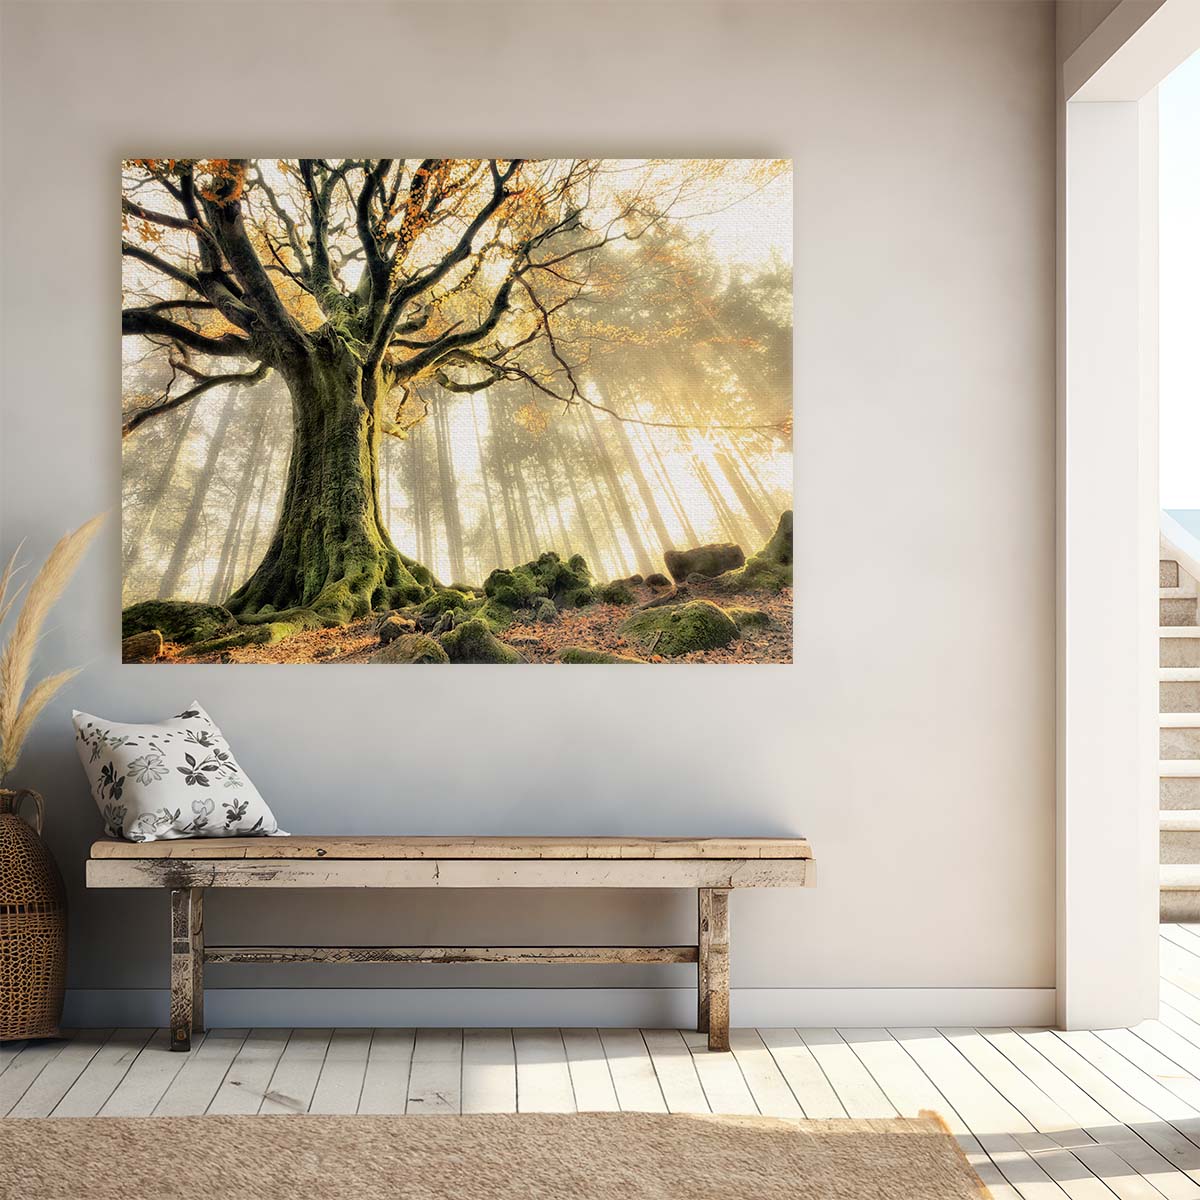 Golden Autumn Sunrise Forest Fantasy Wall Art by Luxuriance Designs. Made in USA.